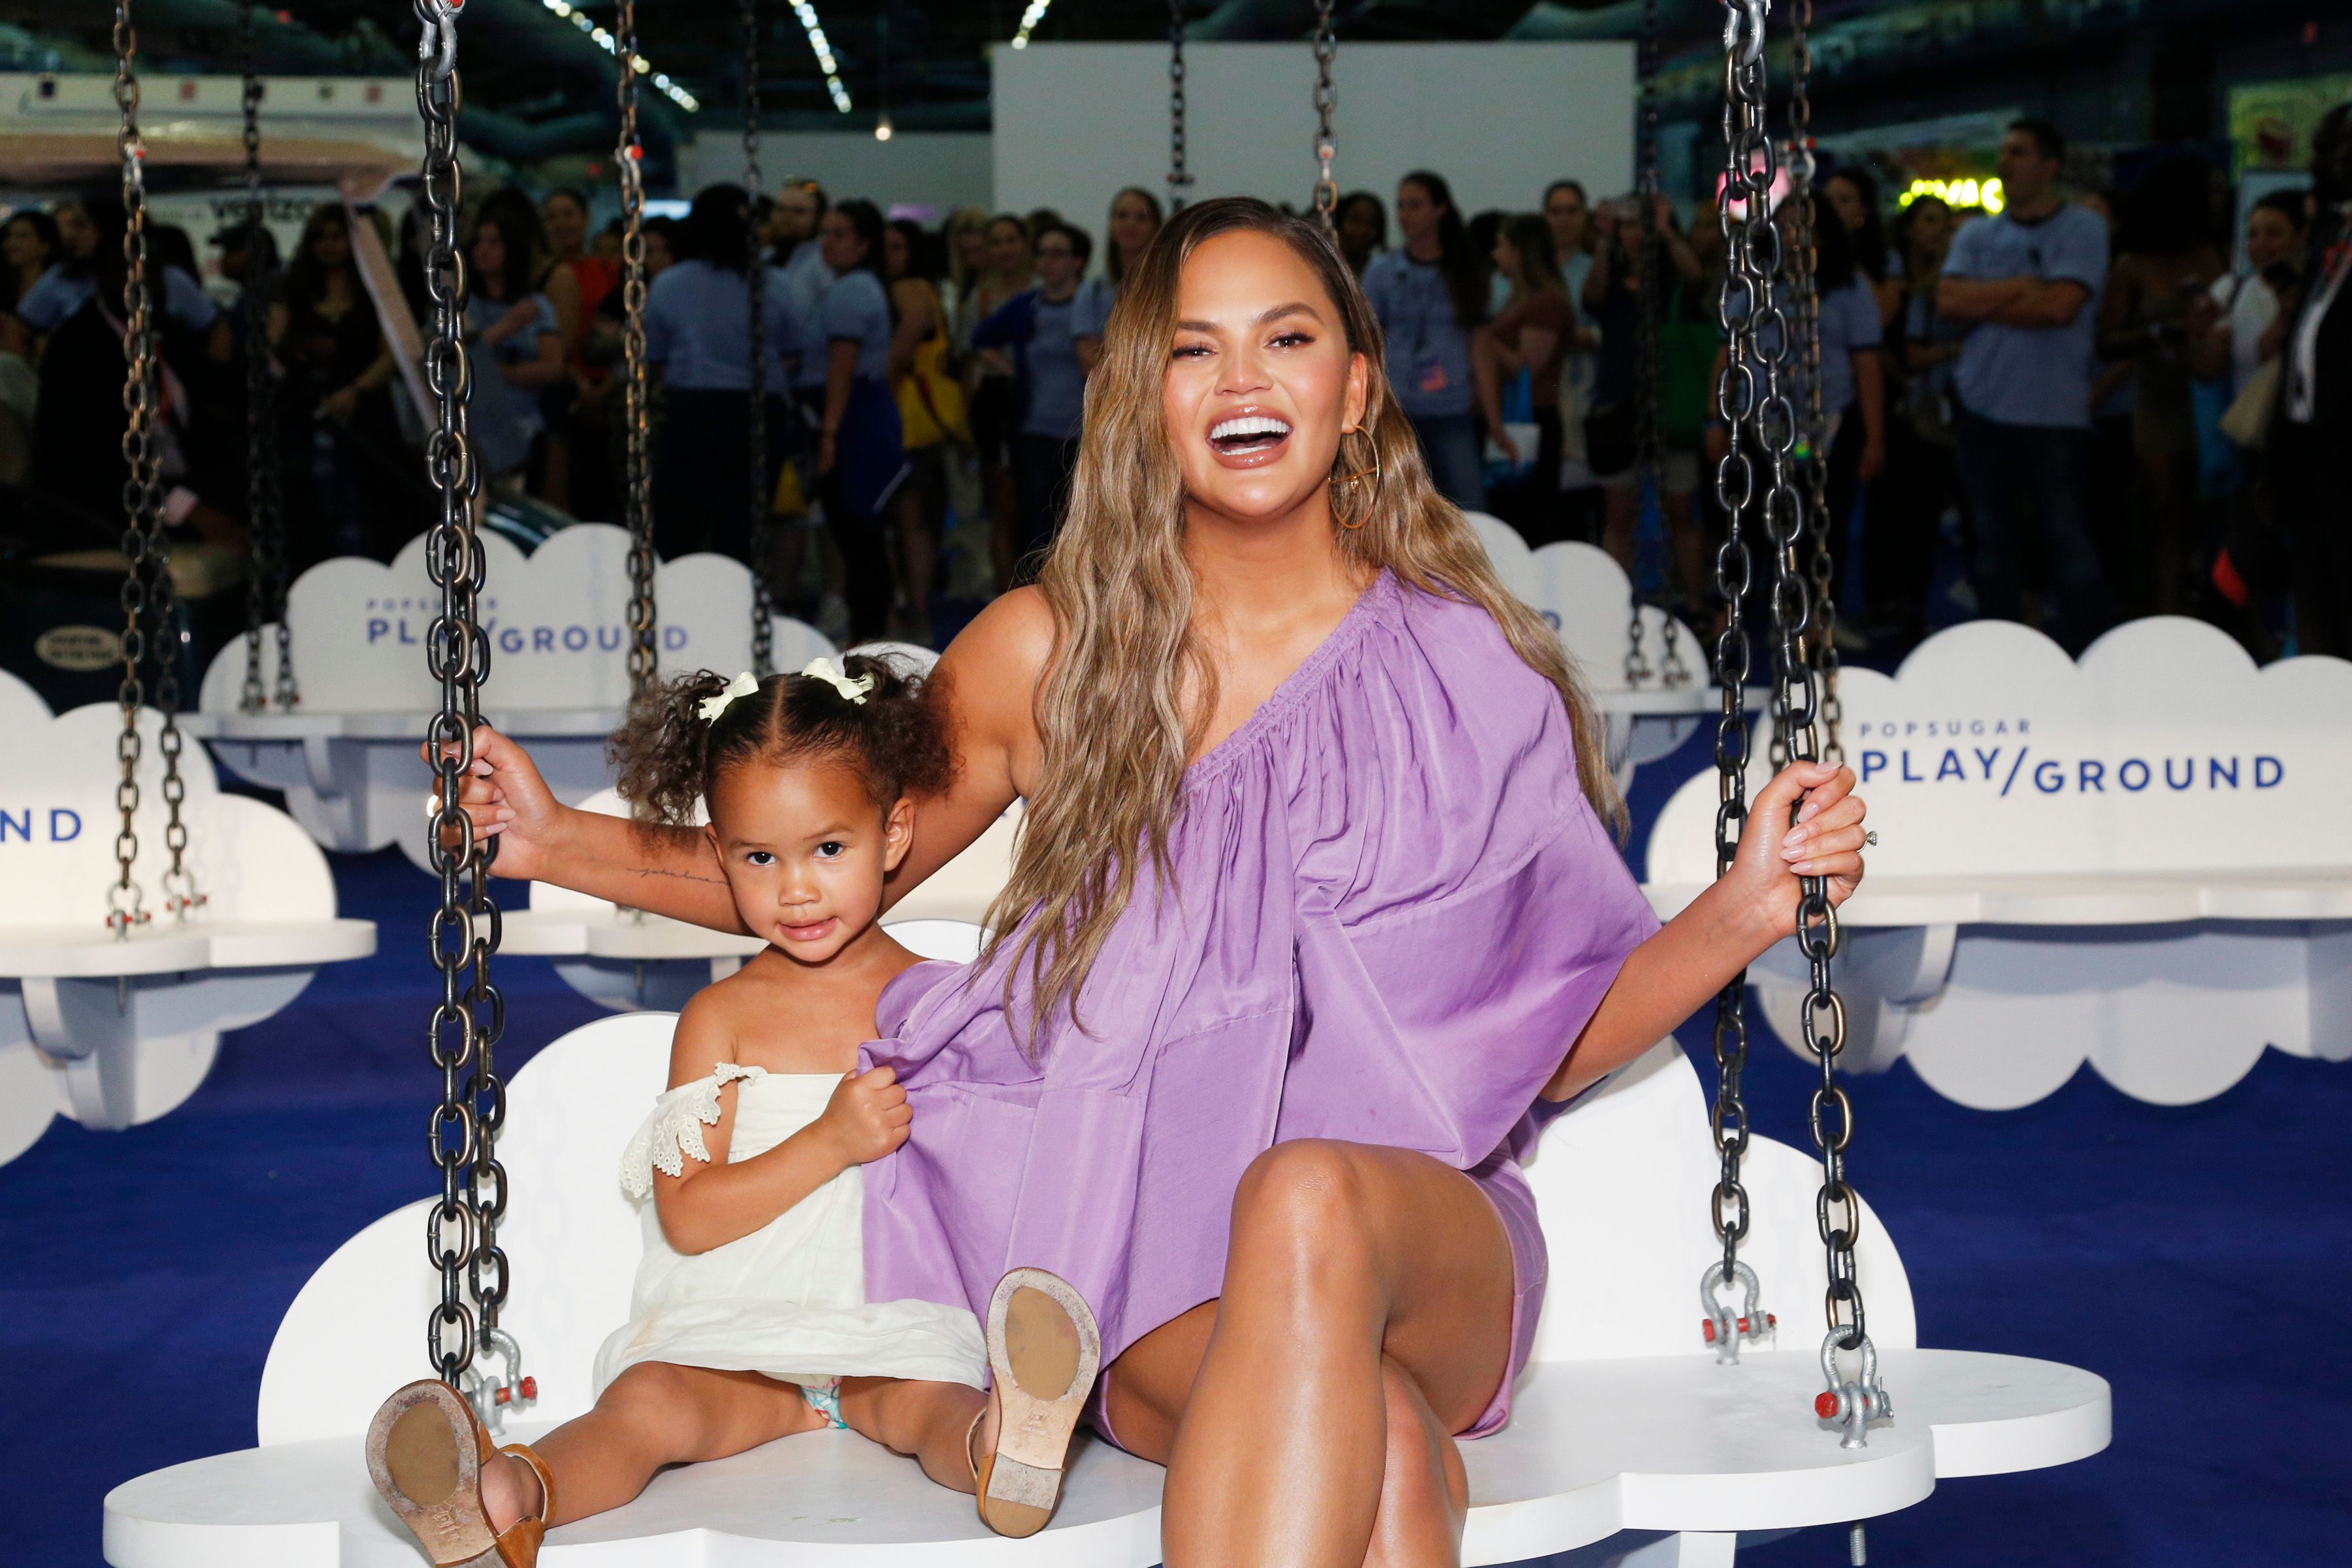 Luna Legend and Chrissy Teigen at the POPSUGAR Play/Ground at Pier 94 in June 2019 in New York | Source: Getty Images